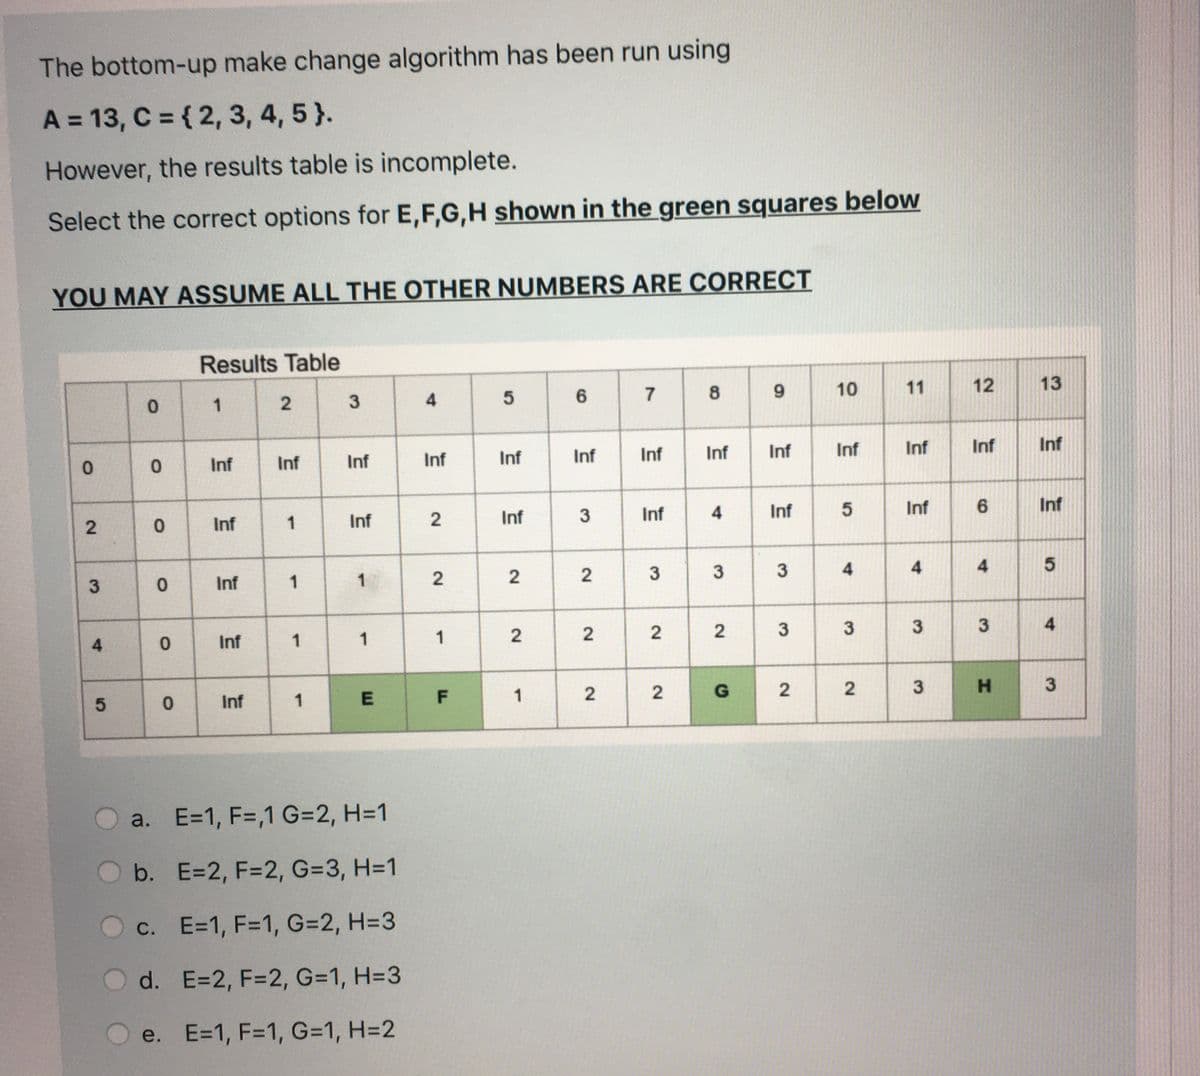 The bottom-up make change algorithm has been run using
A = 13, C = { 2, 3, 4, 5}.
However, the results table is incomplete.
Select the correct options for E,F,G,H shown in the green squares beloW
YOU MAY ASSUME ALL THE OTHER NUMBERS ARE CORRECT
Results Table
1
10
11
12
13
0.
Inf
Inf
Inf
Inf
Inf
Inf
Inf
Inf
Inf
Inf
Inf
Inf
Inf
Inf
1
Inf
Inf
Inf
Inf
Inf
6.
Inf
Inf
1
3
4
4
Inf
1
1
1
3
4
Inf
1
| F
1
3
a. E=1, F=,1 G=2, H=1
b. E=2, F=2, G=3, H=1
C. E=1, F=1, G=2, H=3
d. E=2, F=2, G=1, H=3
e. E=1, F=1, G=1, H=2
3.
4,
3.
4,
3.
2.
3.
3.
2.
8.
4)
3.
2.
7.
2.
2.
3.
2.
2.
5
2.
2.
4,
2.
2.
2.
2.
3.
5
